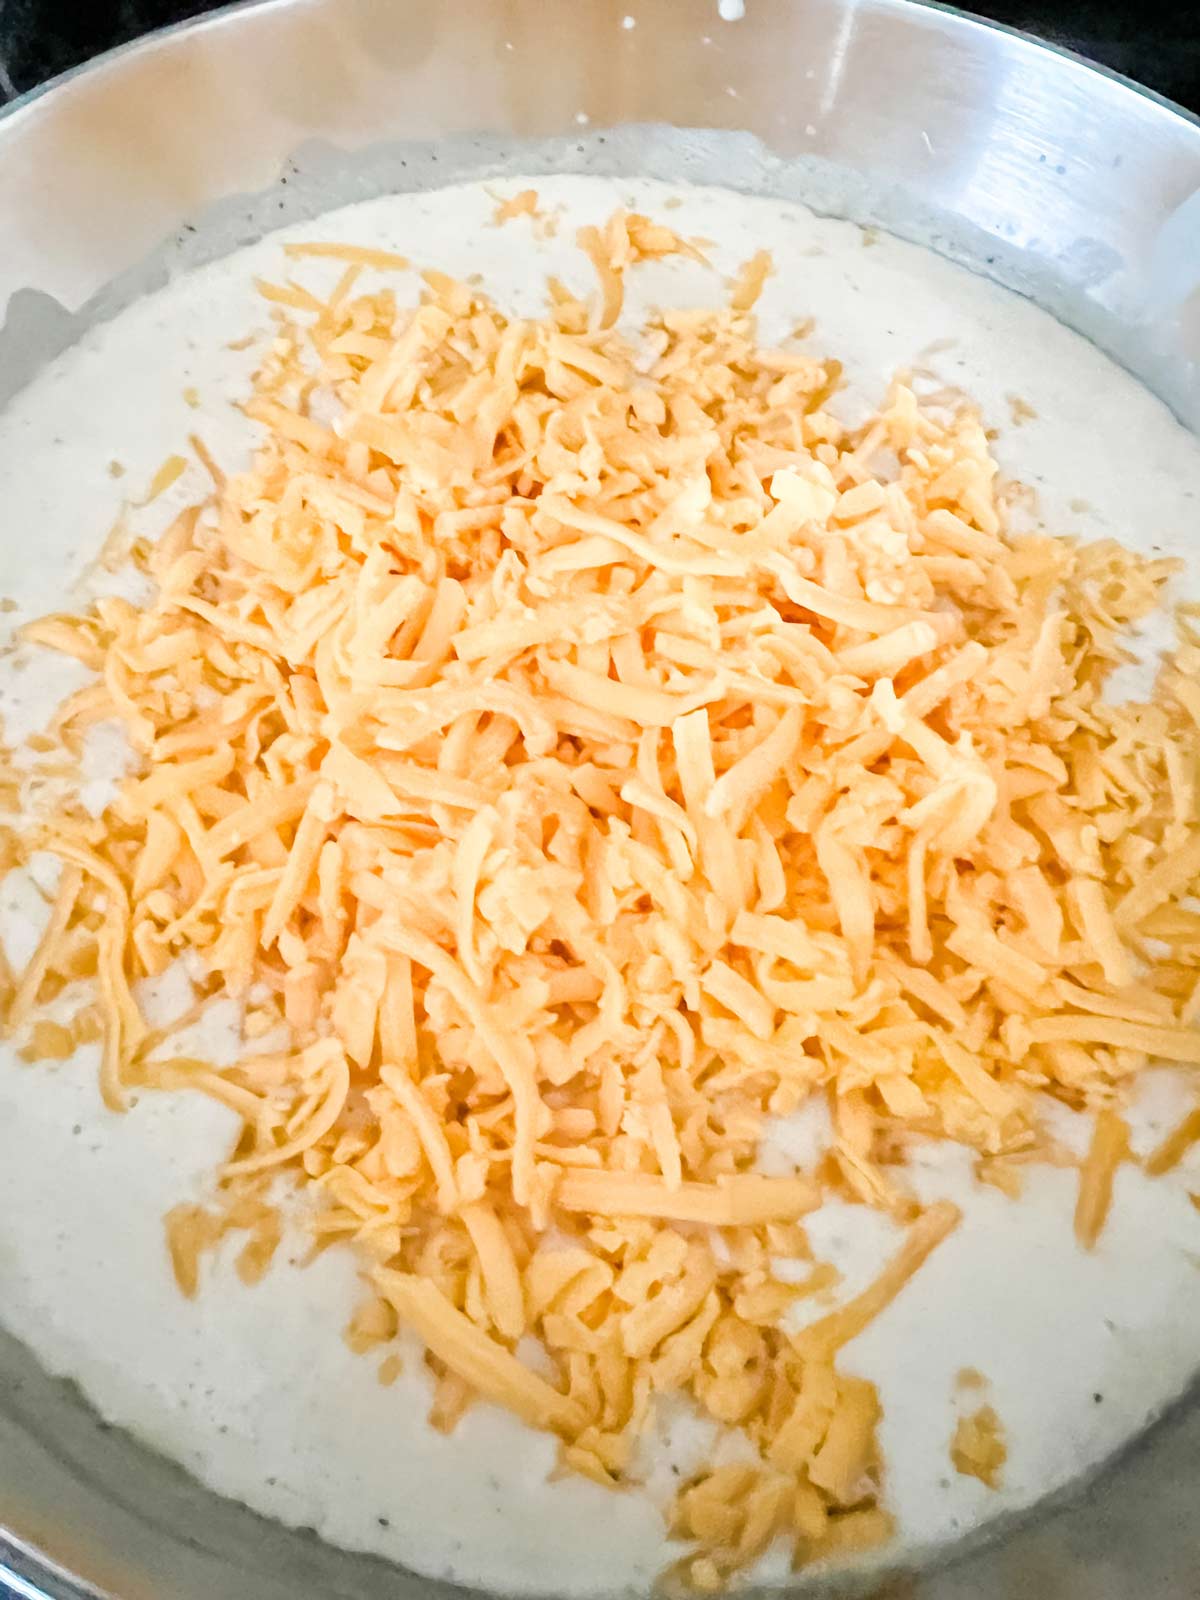 A saucepan with cream sauce that has just had shredded cheddar sprinkled over it.